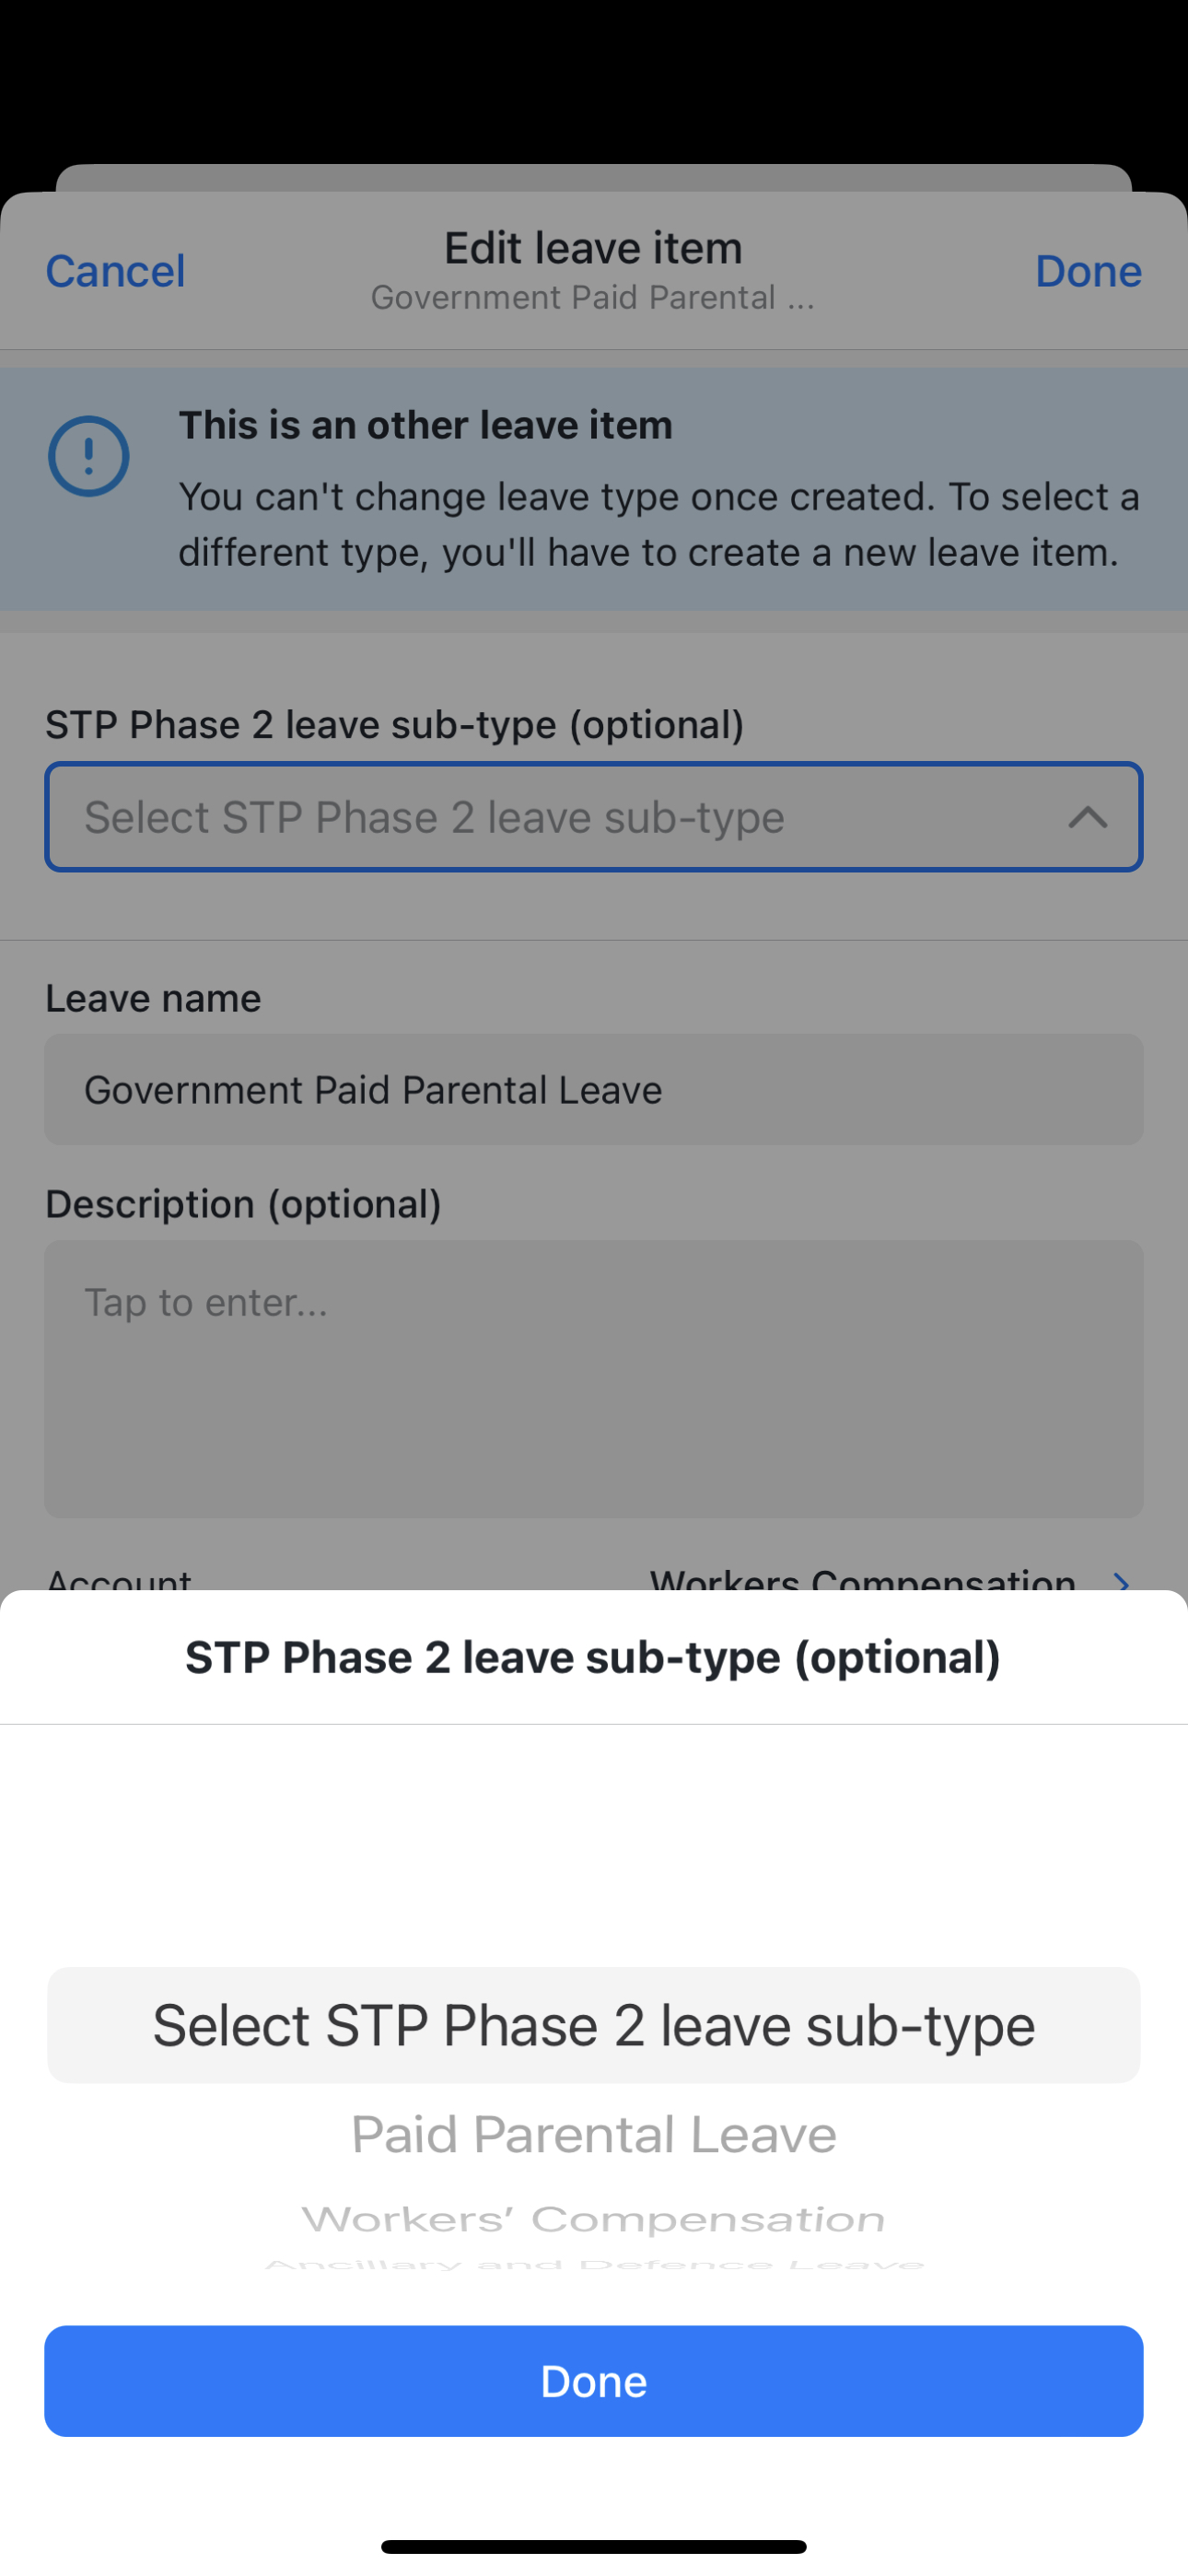 Other leave STP Phase 2 leave sub-category (optional)